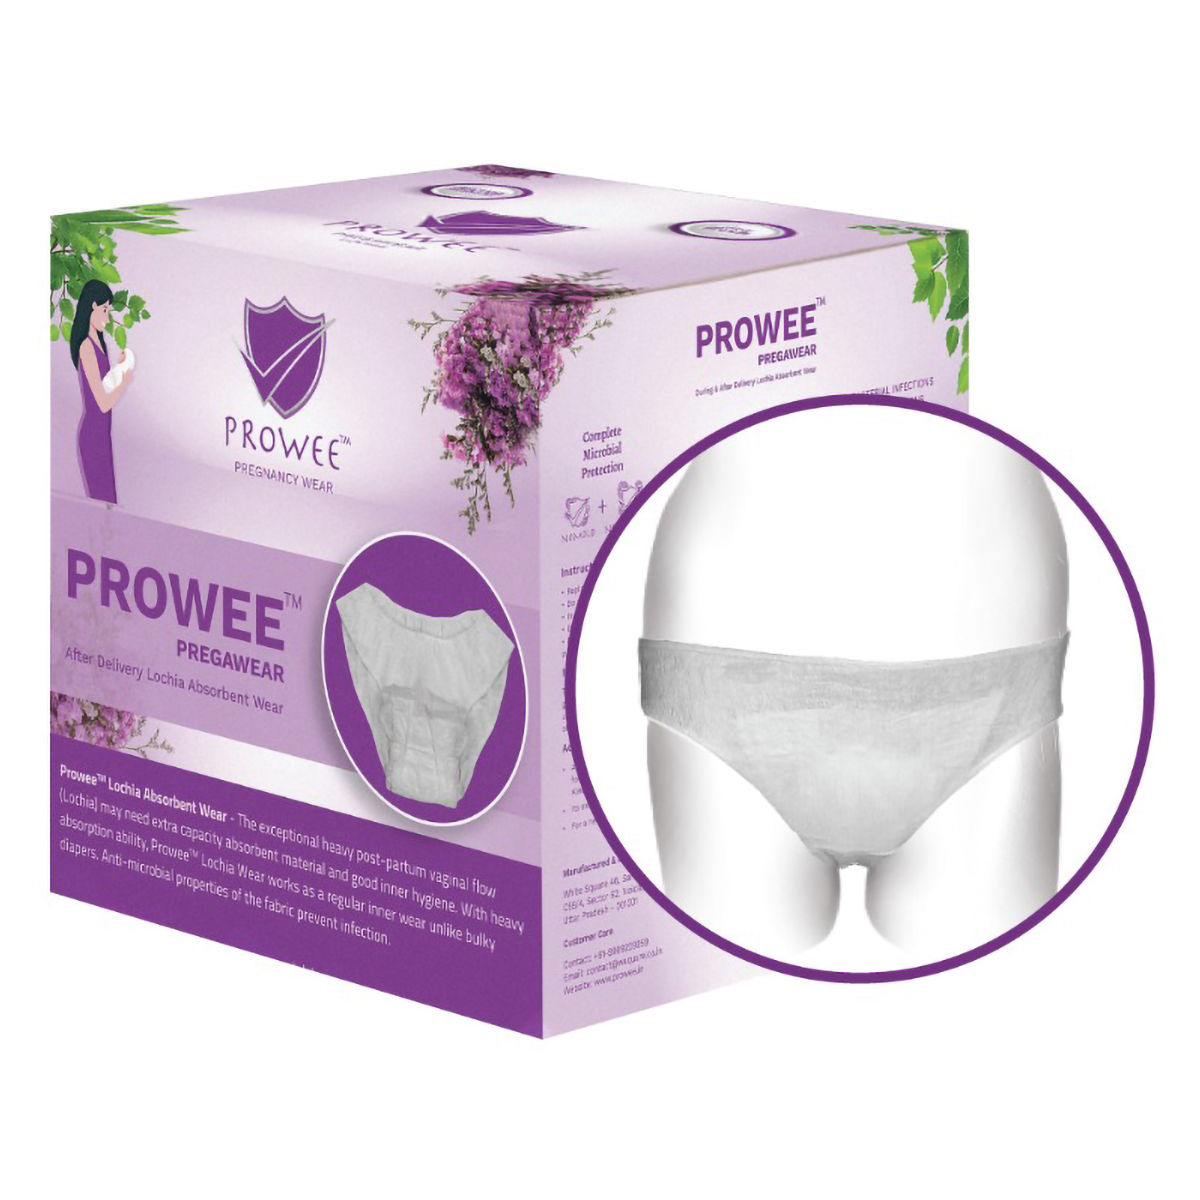 Disposable briefs for after the birth of your baby - online at